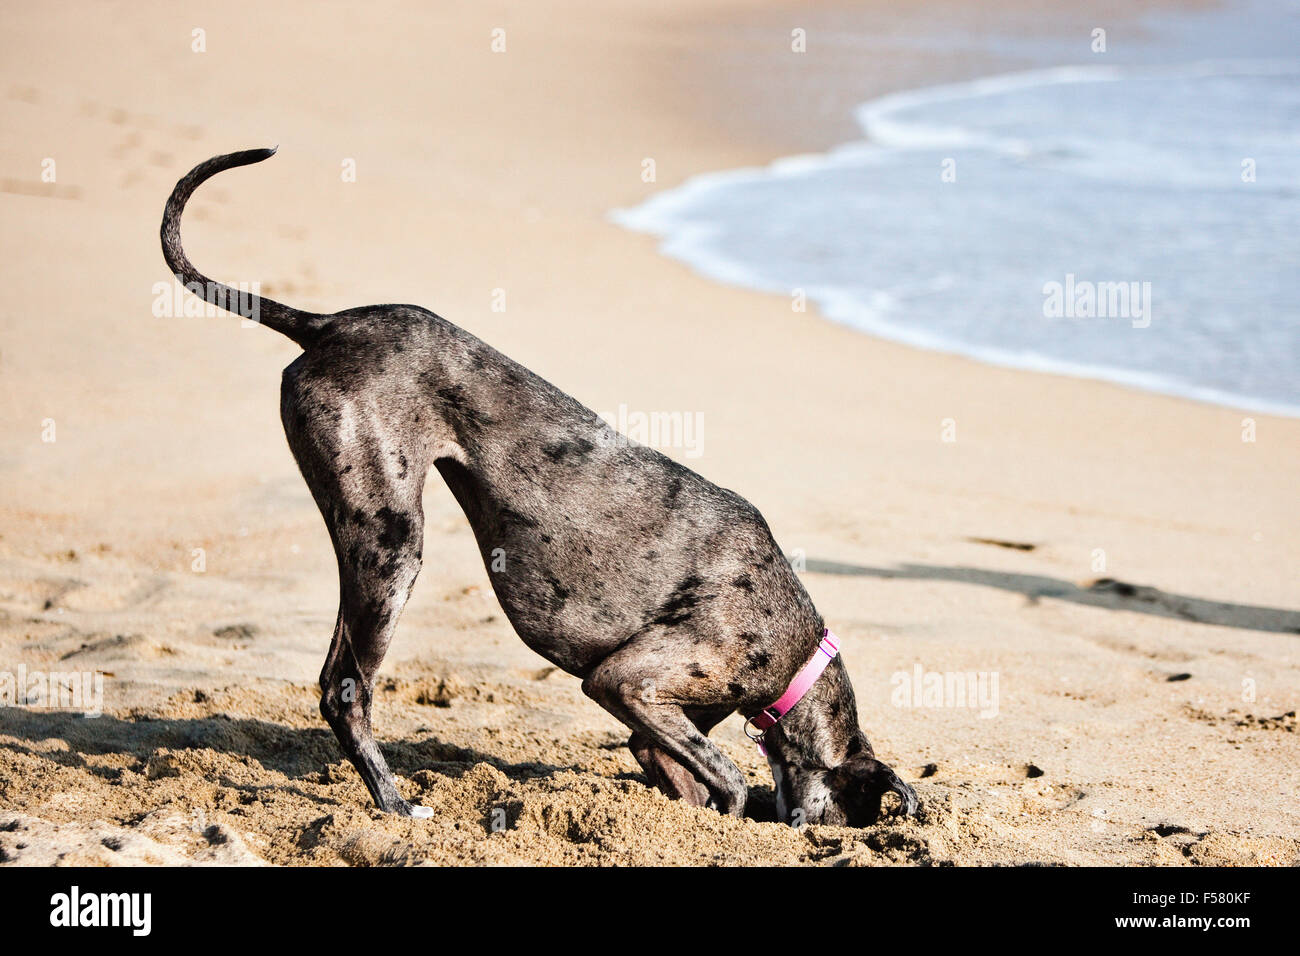 Humorous sunny day beach adult Great Dane dog digs big hole in sand with head completely inside hole butt up in air curled tail Stock Photo